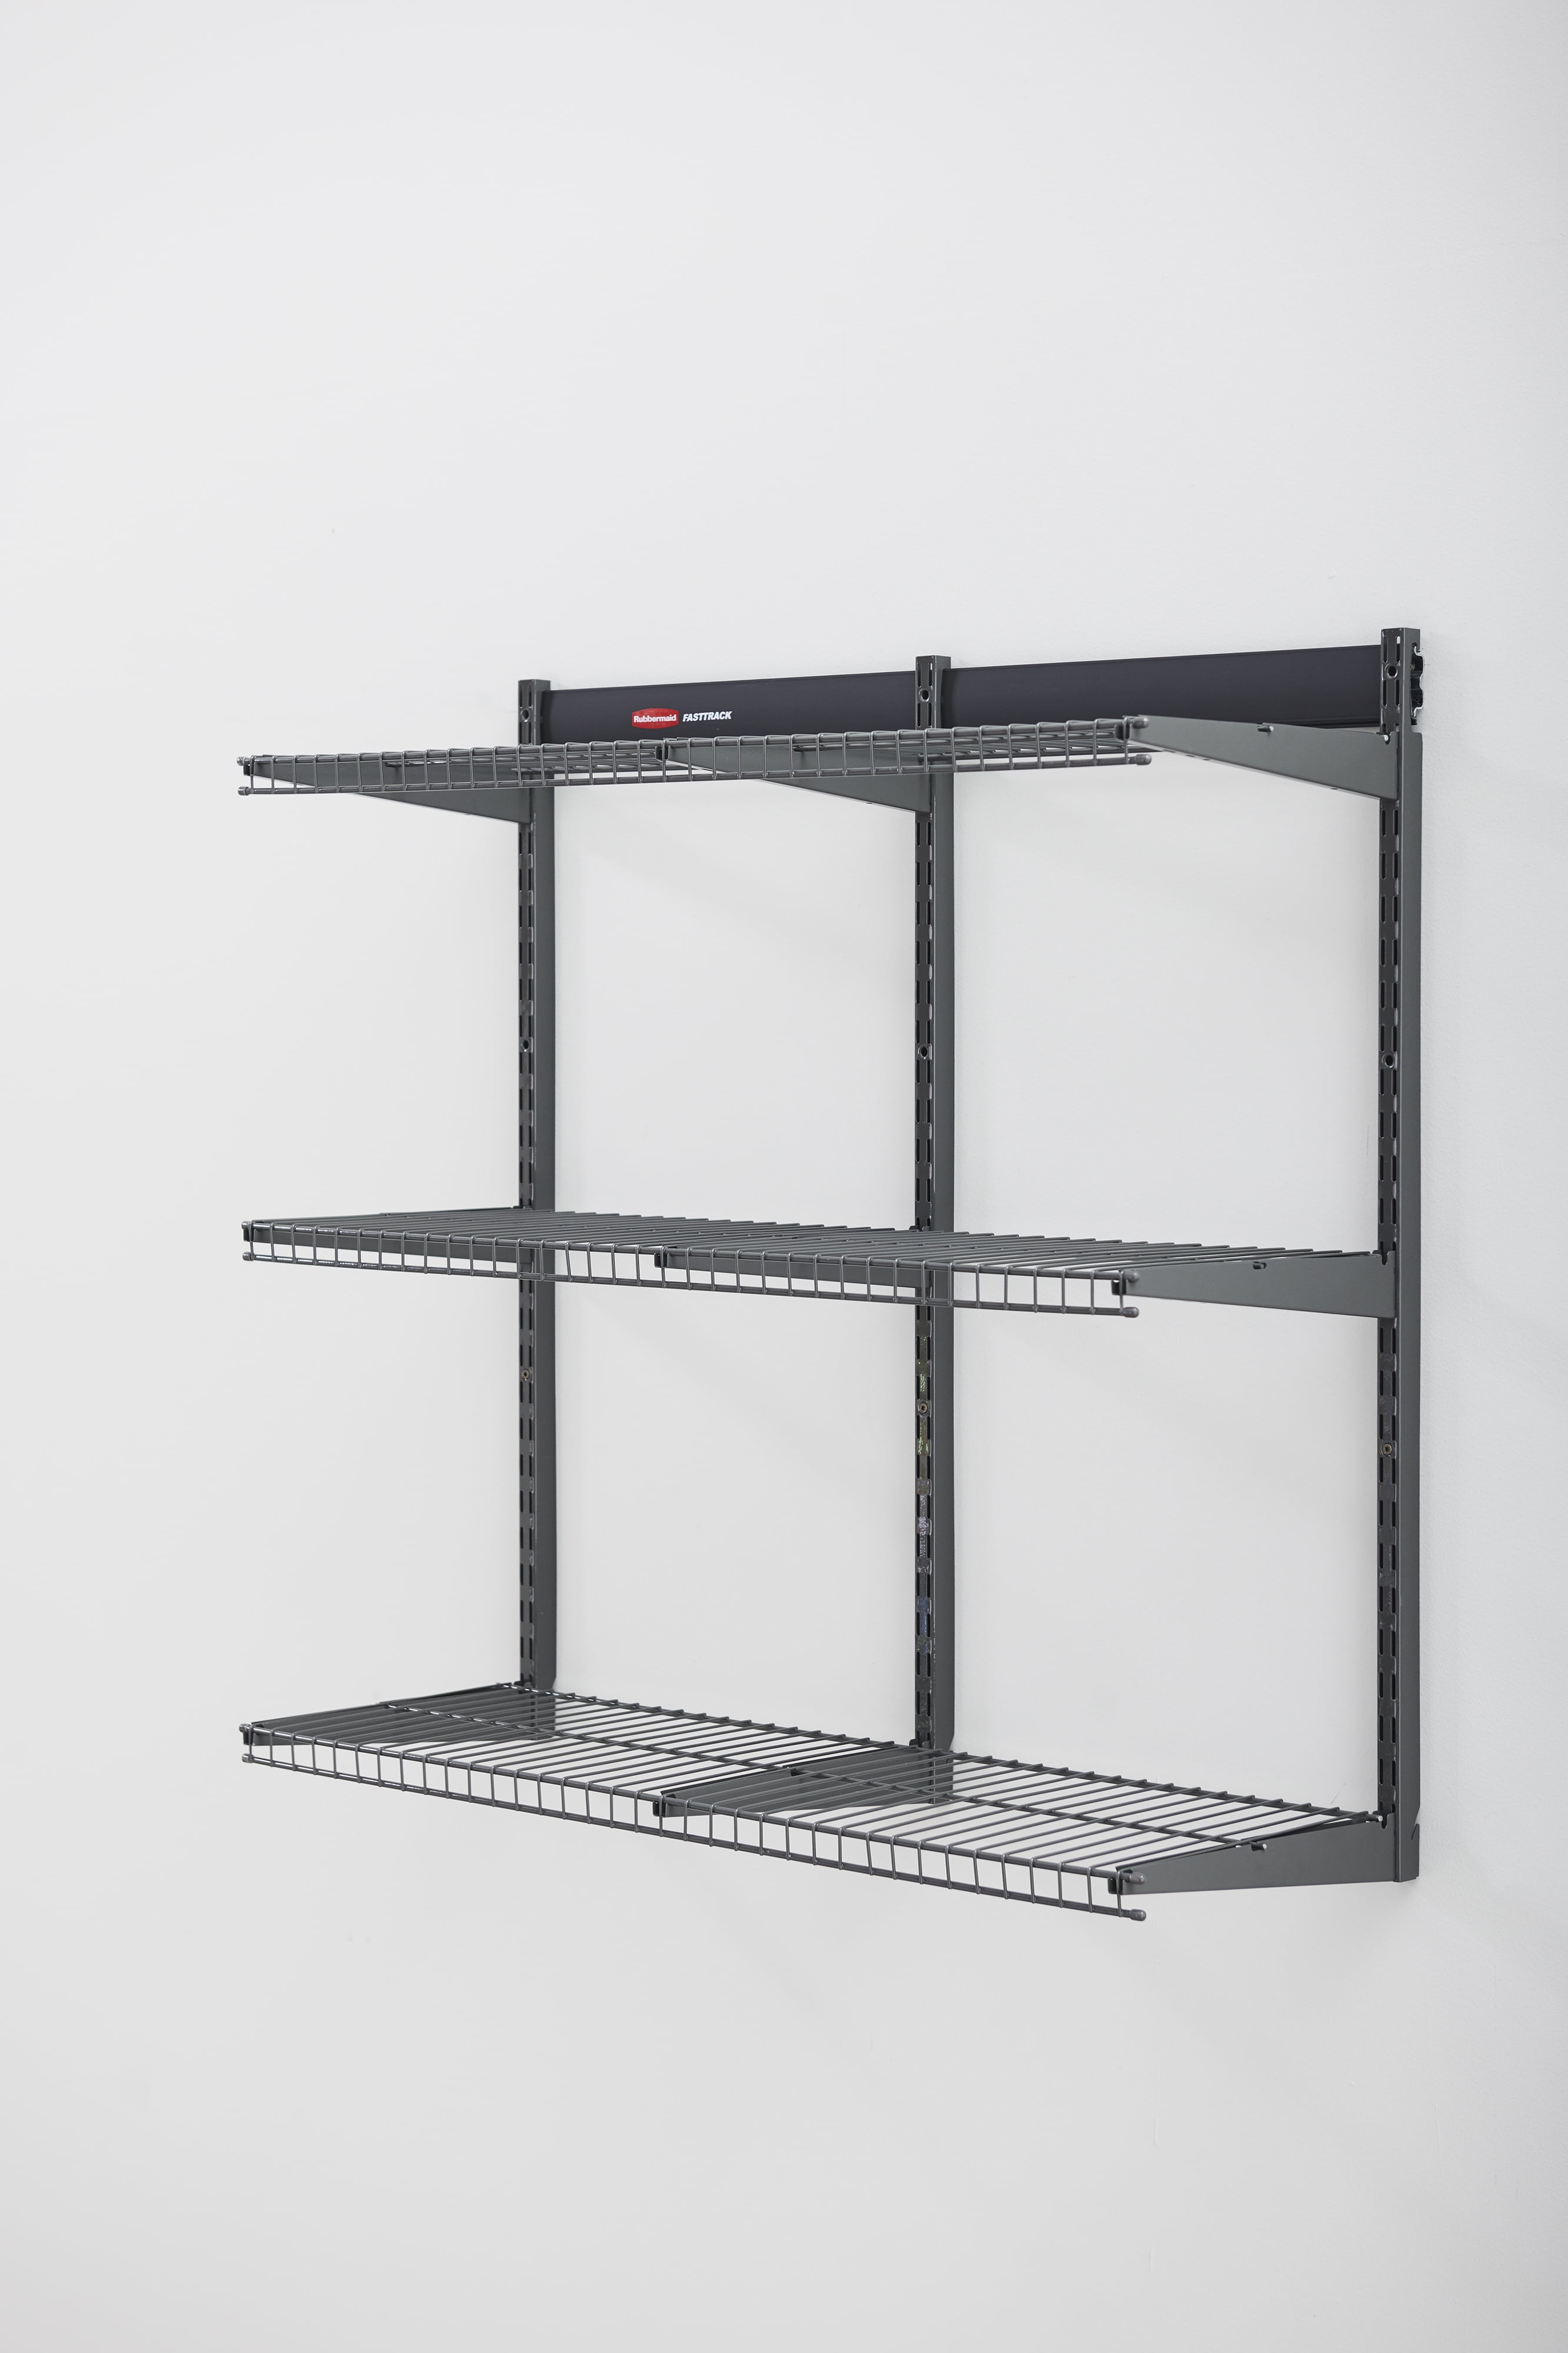 Rubbermaid Fasttrack Garage Storage All, Rubbermaid Shelving Instructions